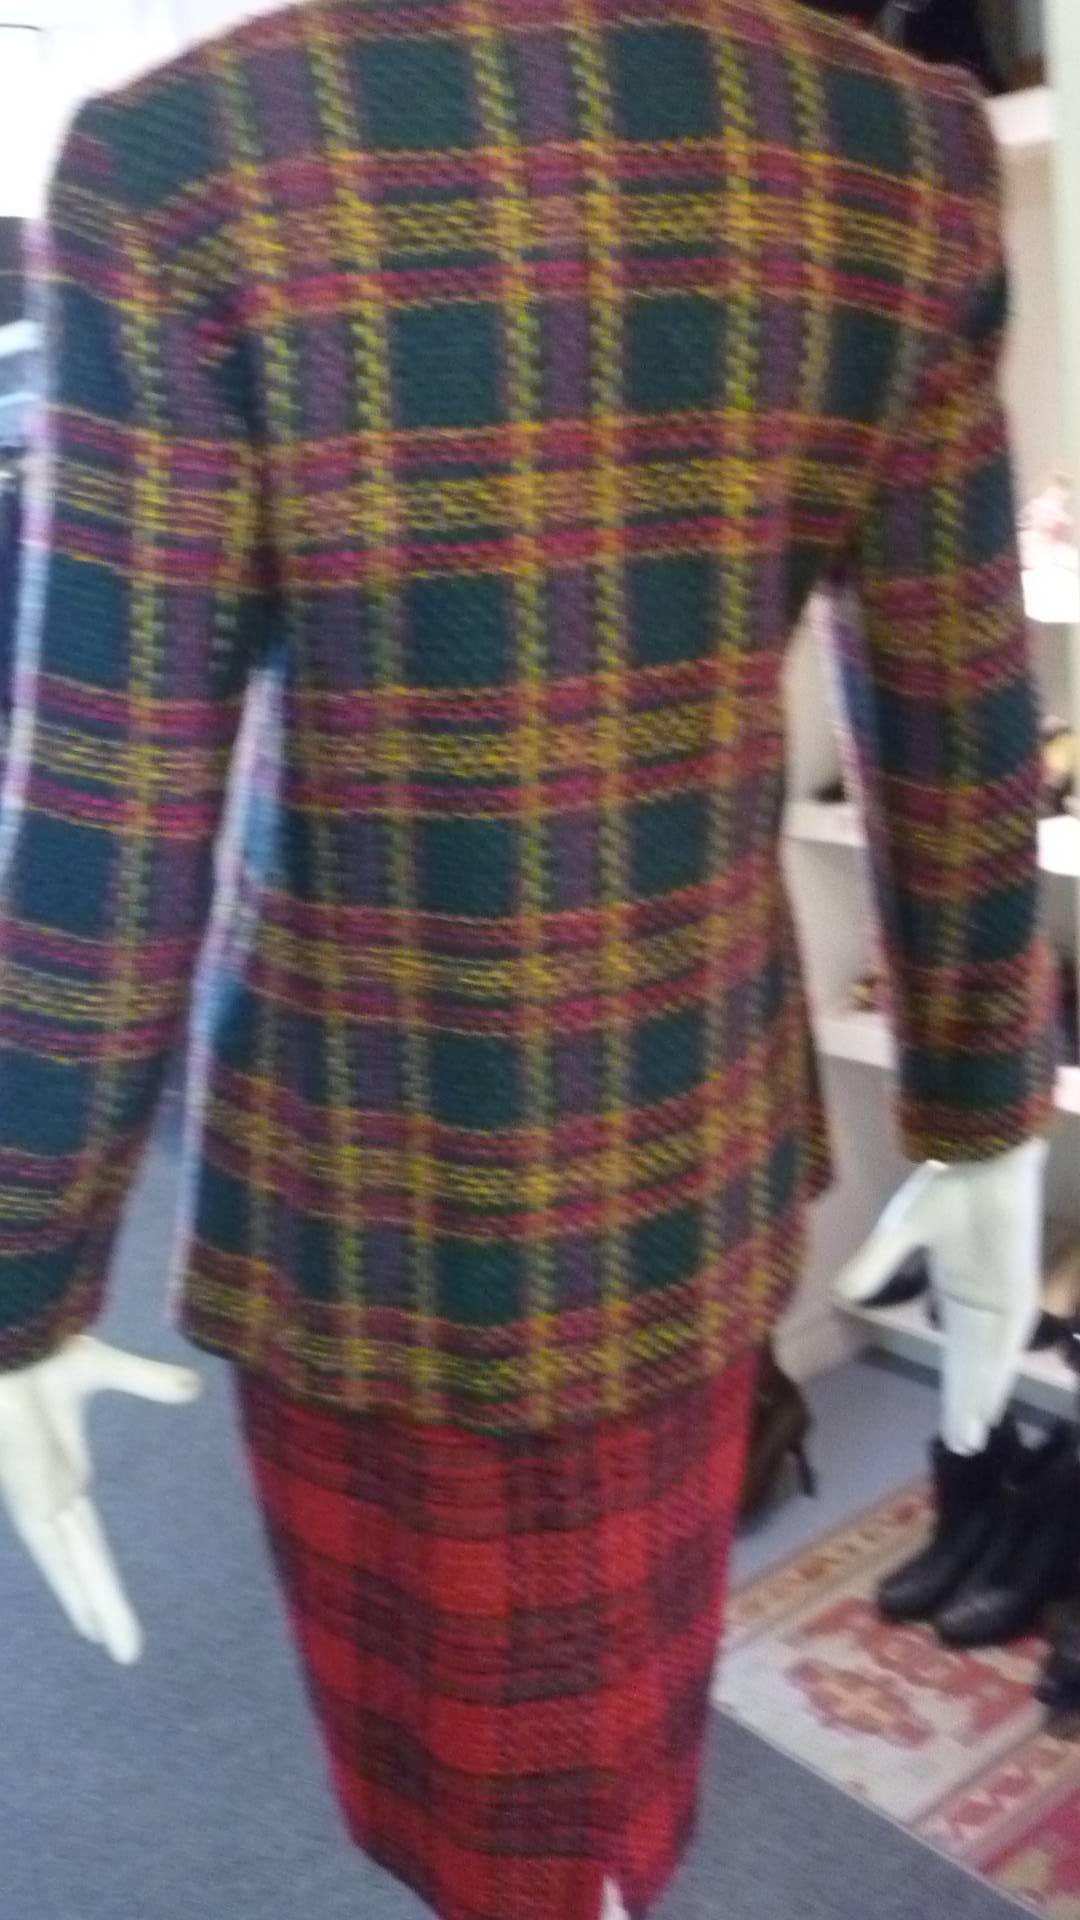 The two pieces are from the same collection with the jacket being a petites and size 8 and the skirt regular and a 6.

Made of a viscose/wool blend the checkered/plaid pieces blend nicely. The jacket has a one button closure and two hip pockets